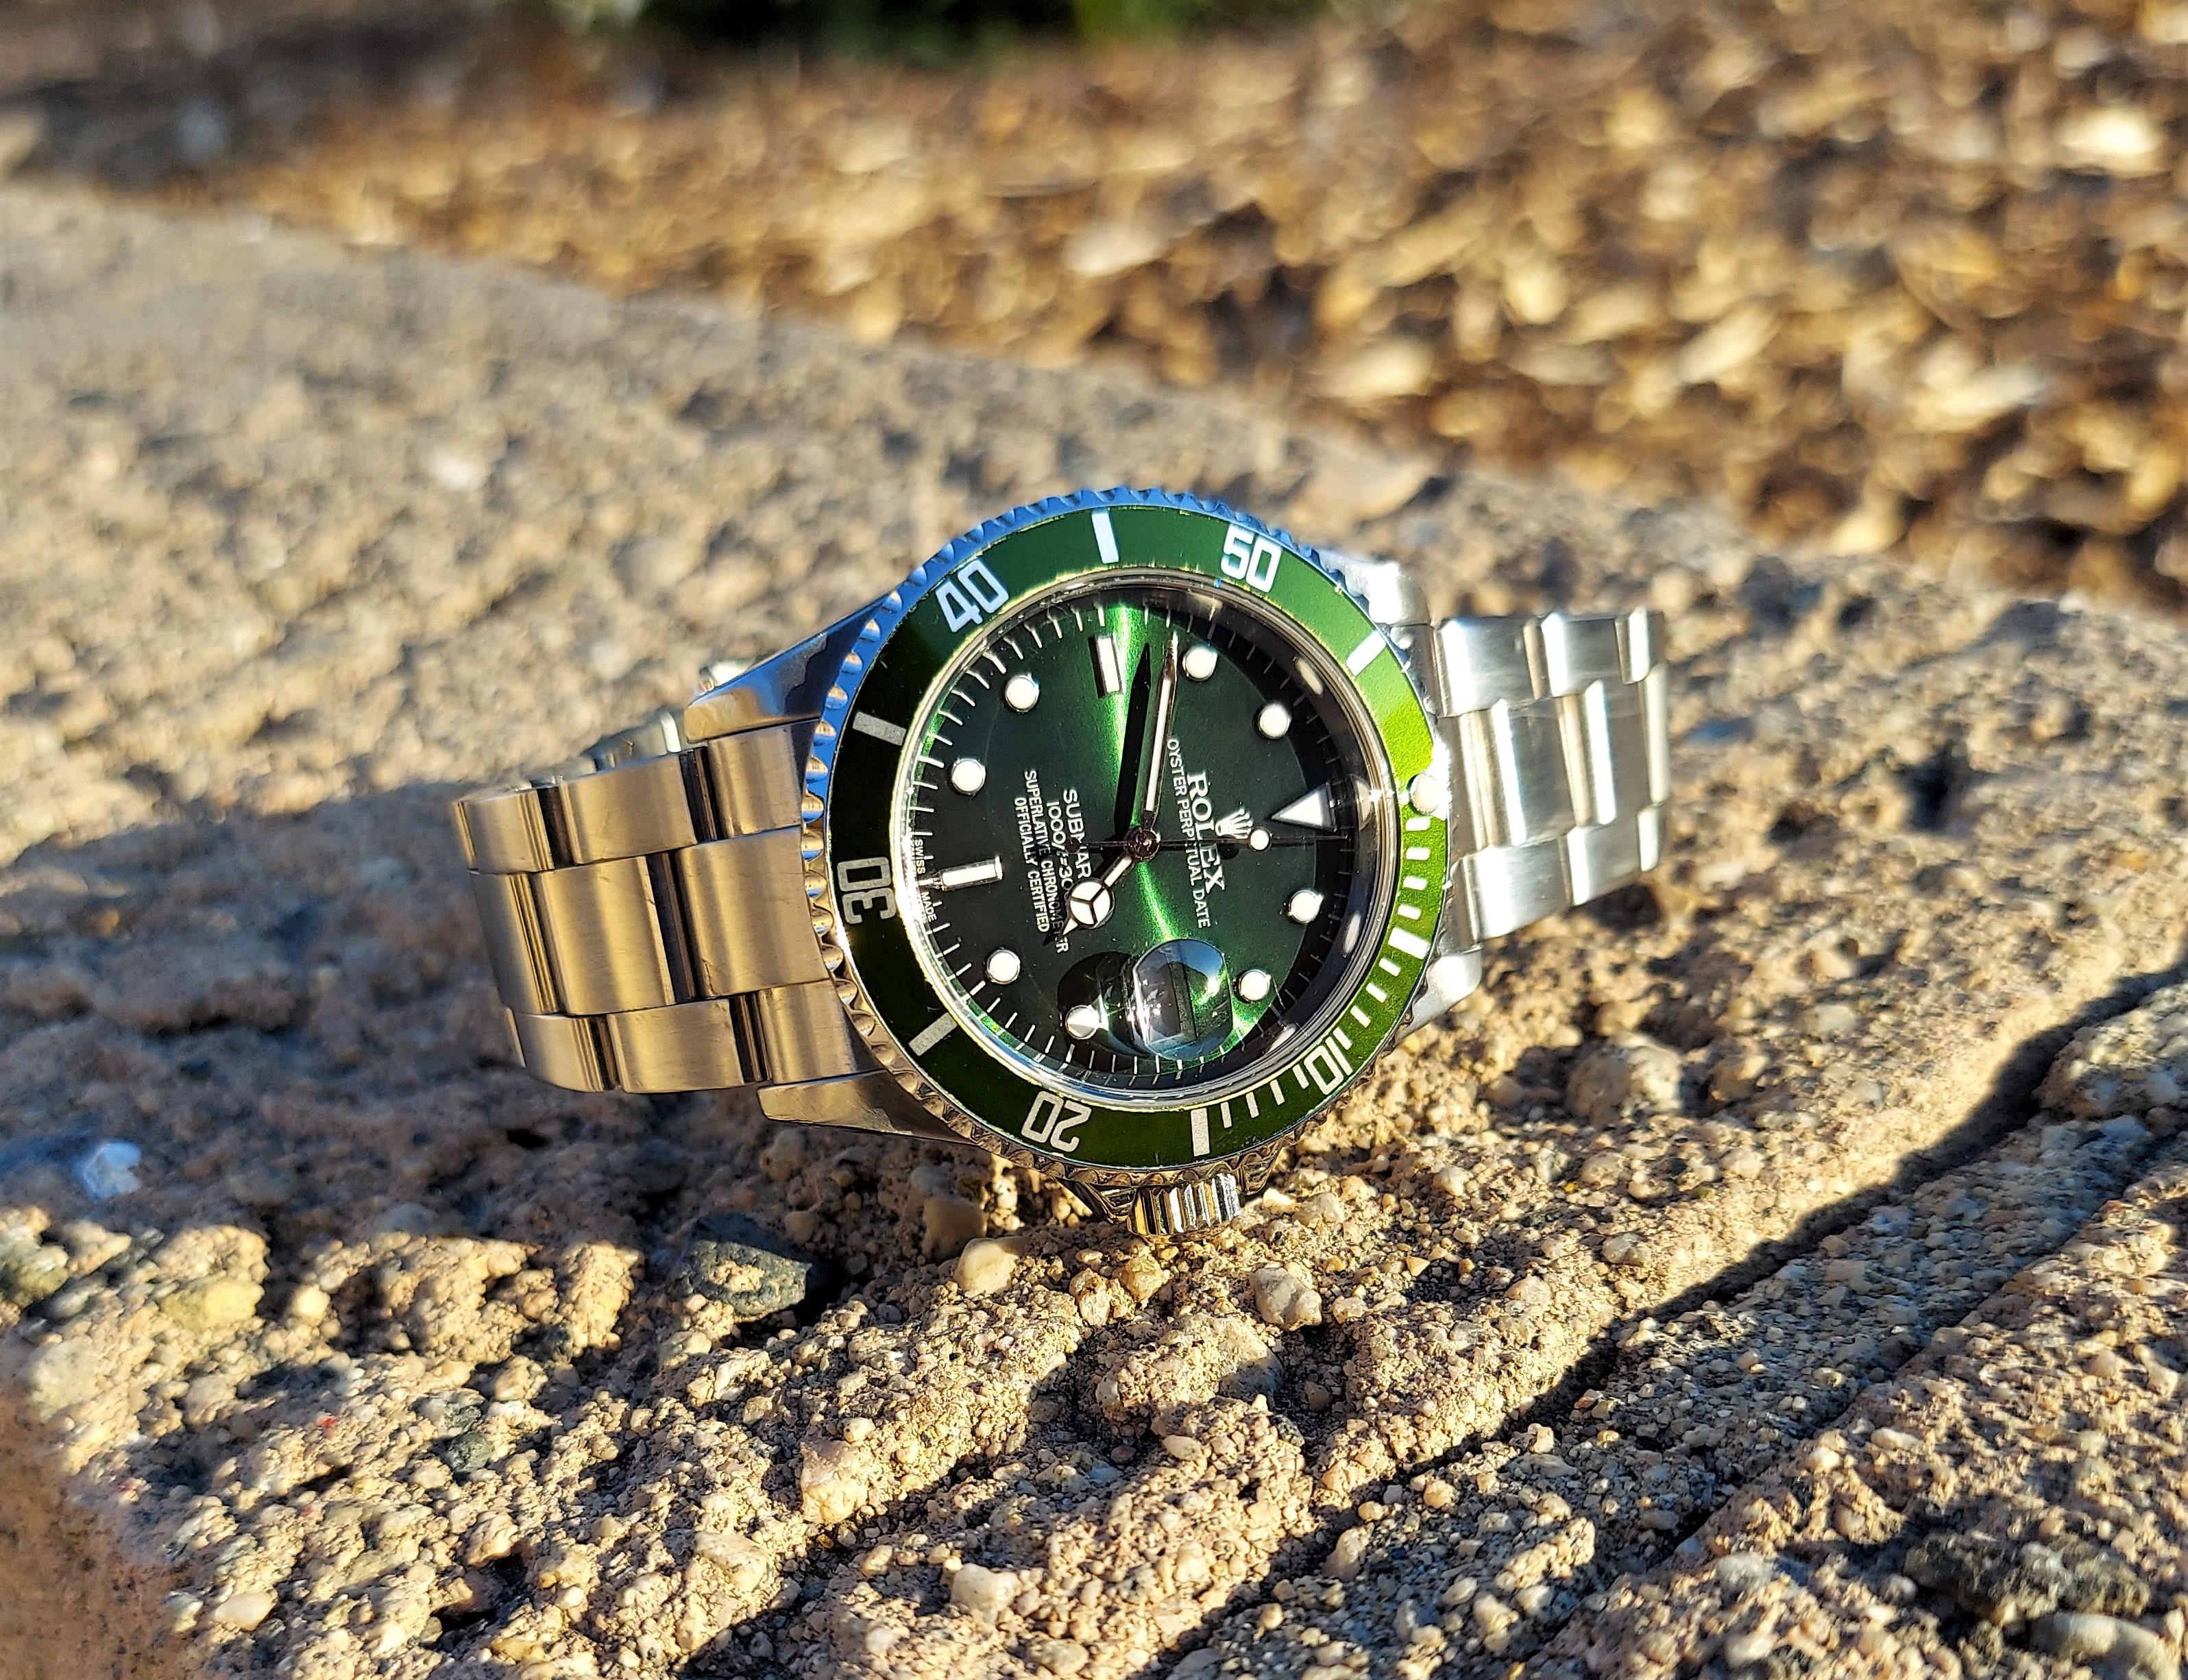 Brand - Rolex
Model - 16610 Submariner
Gender - Men's
Case Size - 40mm
Dial - Refinished Green
Bezel - Steel Green 
Crystal - Saphire
Movement - Automatic Rolex CAL.3135
Band - Steel Oyster
Wrist Size - 8 Inches